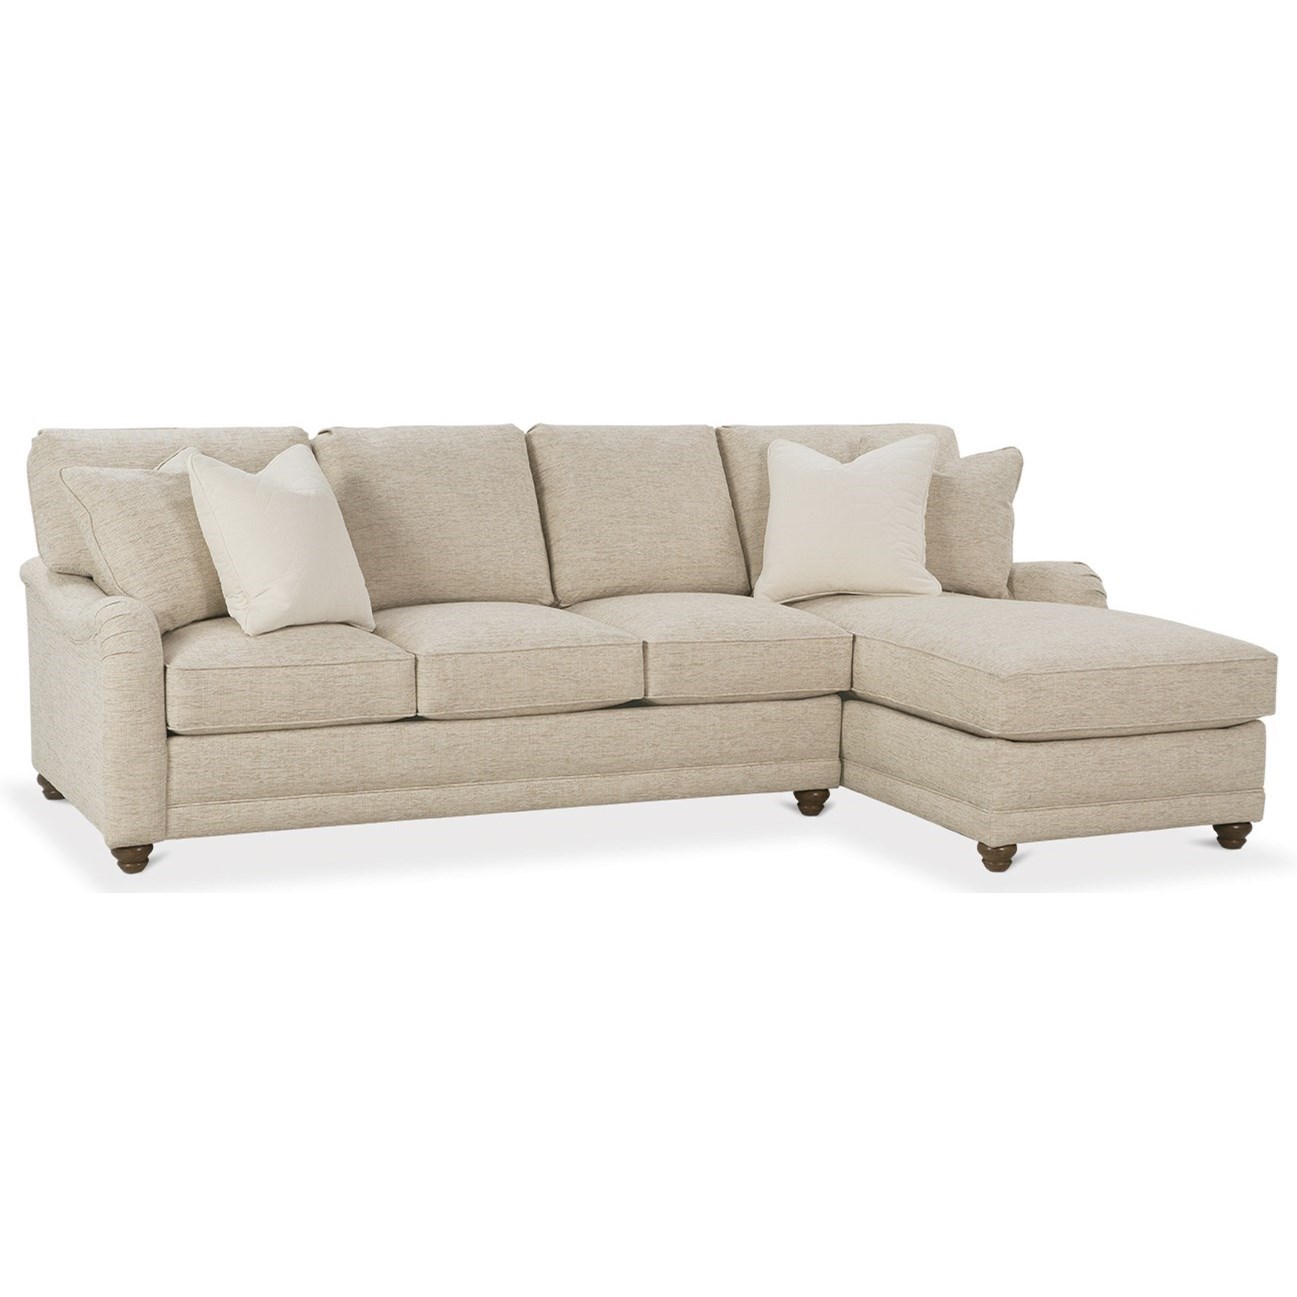 Customizable Sectional Sofa Chaise with English Arms, Turned Legs, and Knife Style Cushions